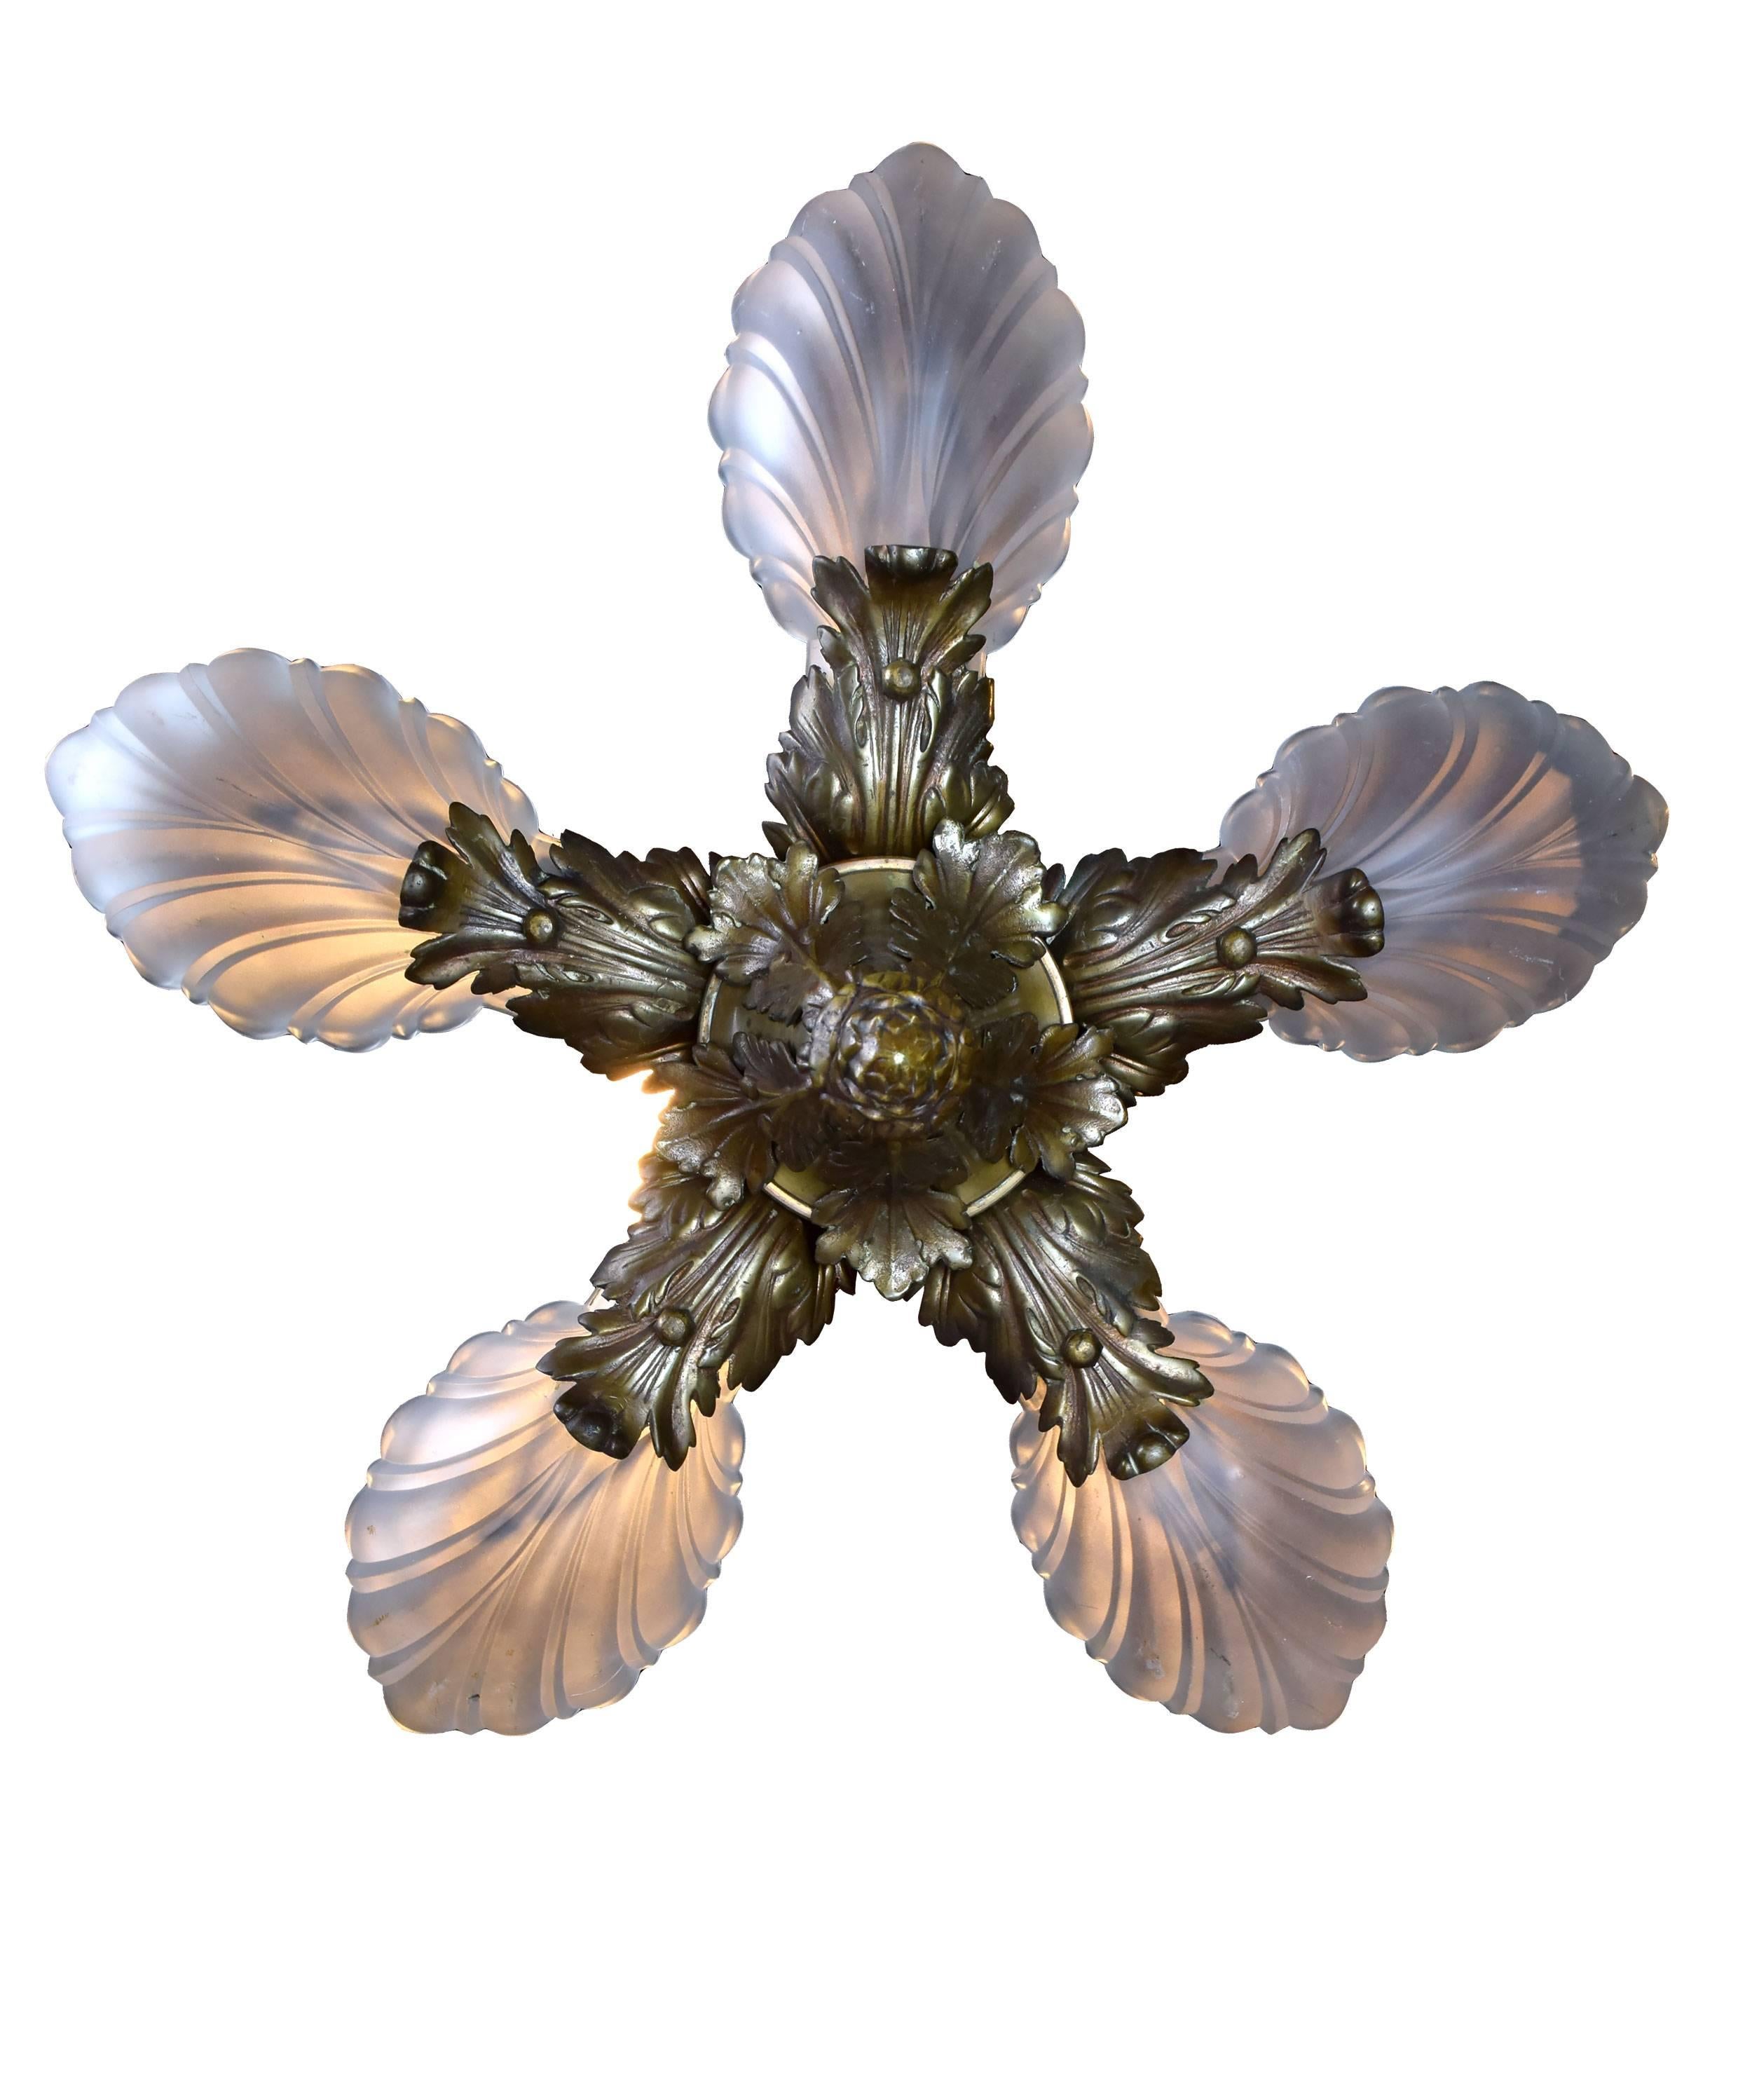 This incredible Art Deco brass chandelier features five opaque shades whose scalloped detailing beautifully matches the curving, leafy details throughout the fixture. Details abound; from the Classic pineapple finial to the scrolling details on the